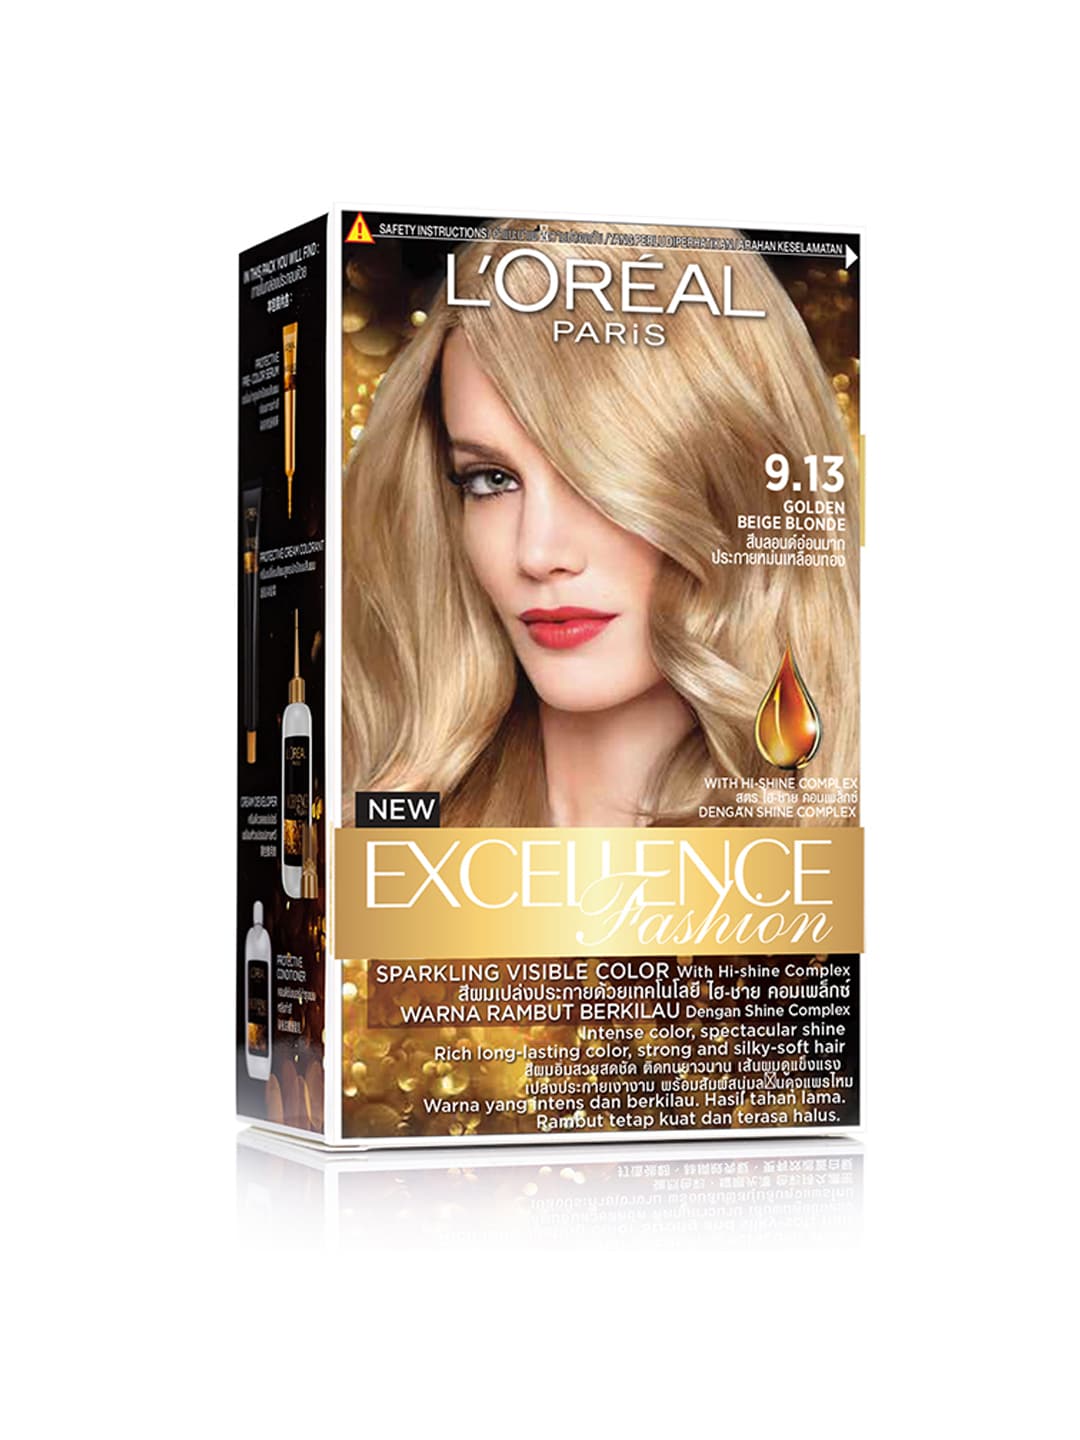 LOreal Paris Excellence Fashion Hair Color - Golden Beige Blonde Price in India